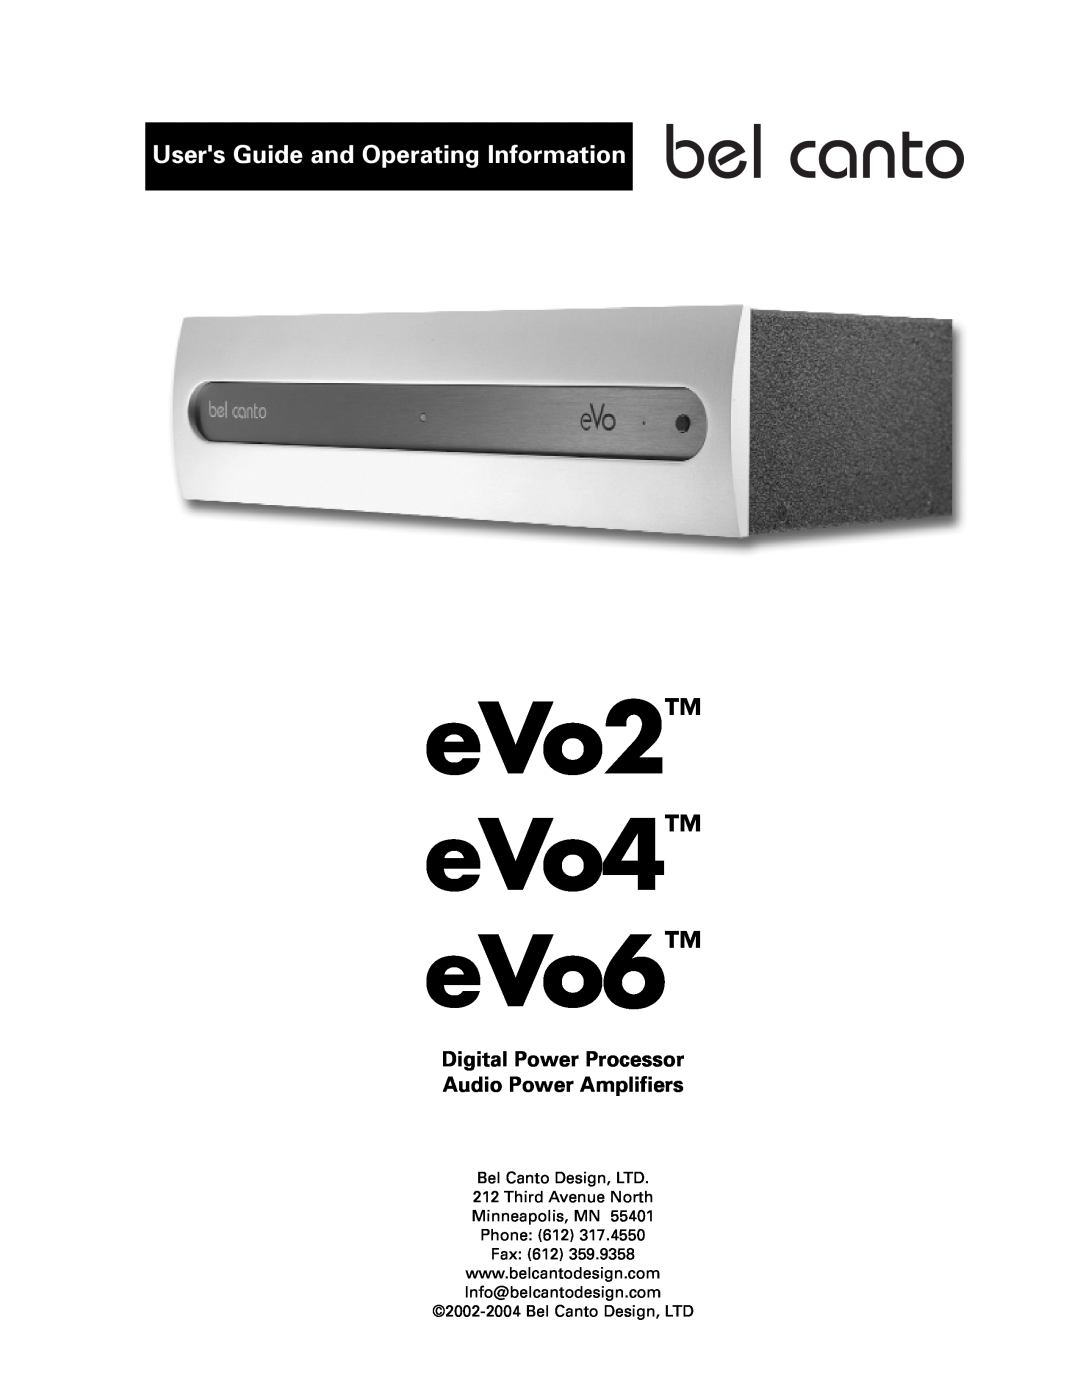 Bel Canto Design manual eVo2 eVo4 eVo6, Users Guide and Operating Information, Minneapolis, MN Phone 612 Fax 